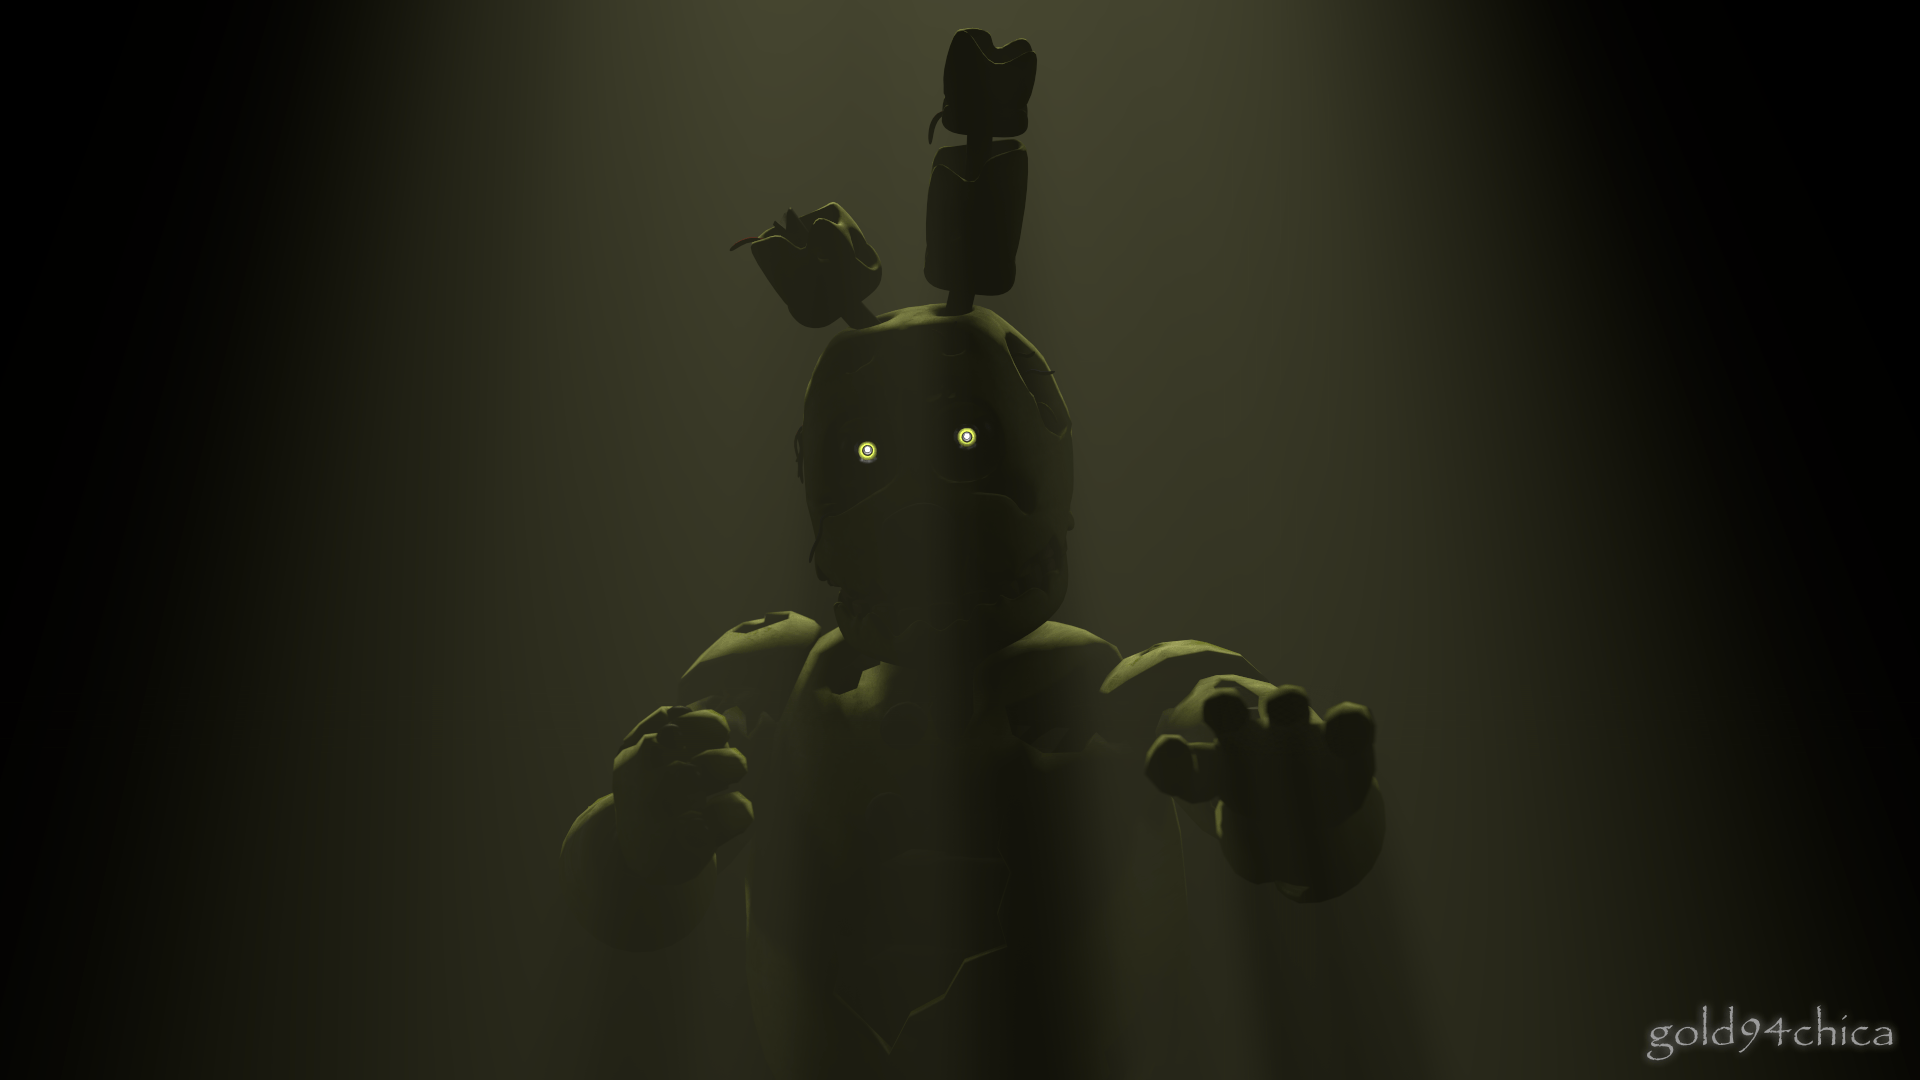 five nights at anime springtrap jumpscare